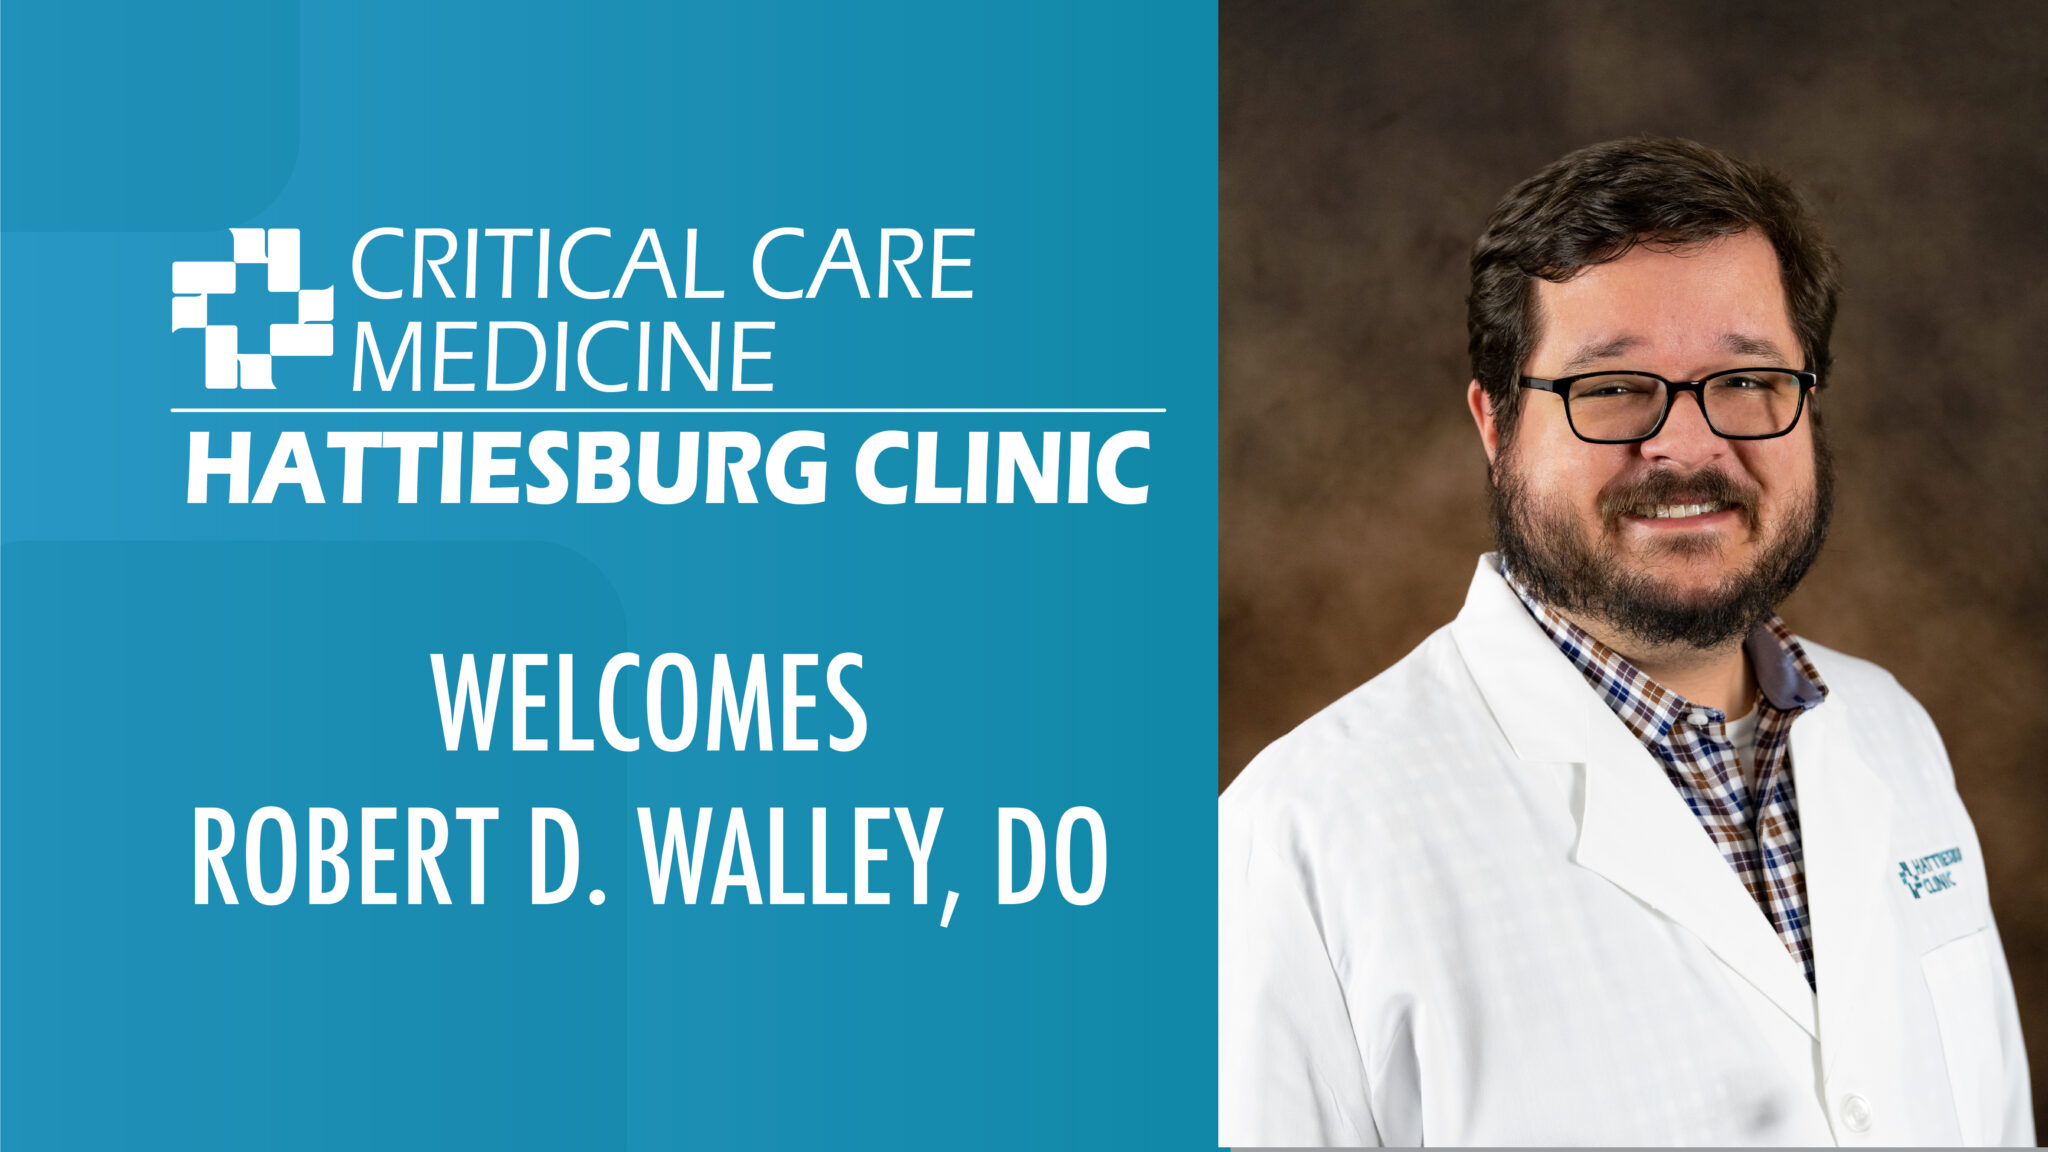 Welcome, Dr. Walley